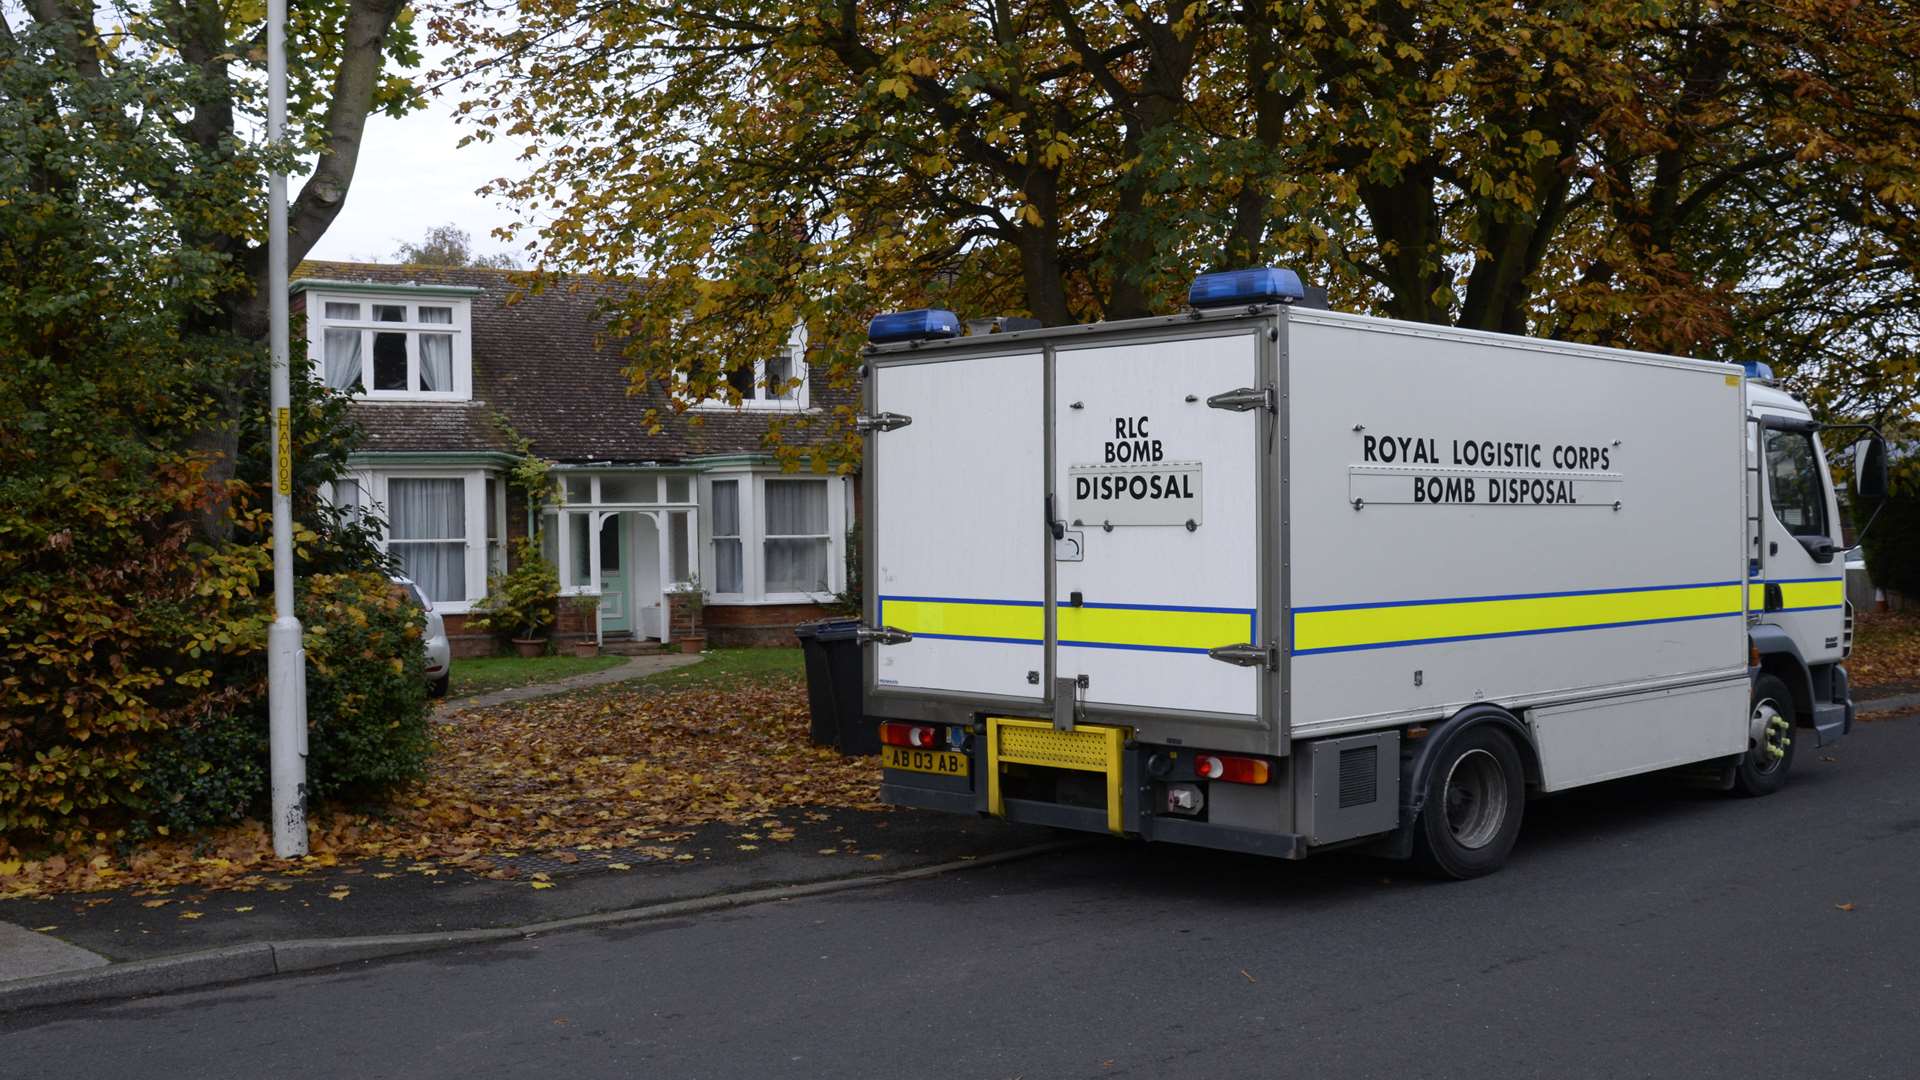 A Royal Logistics Corps bomb disposal van in Ham Shades Lane, Whitstable on Tuesday morning.